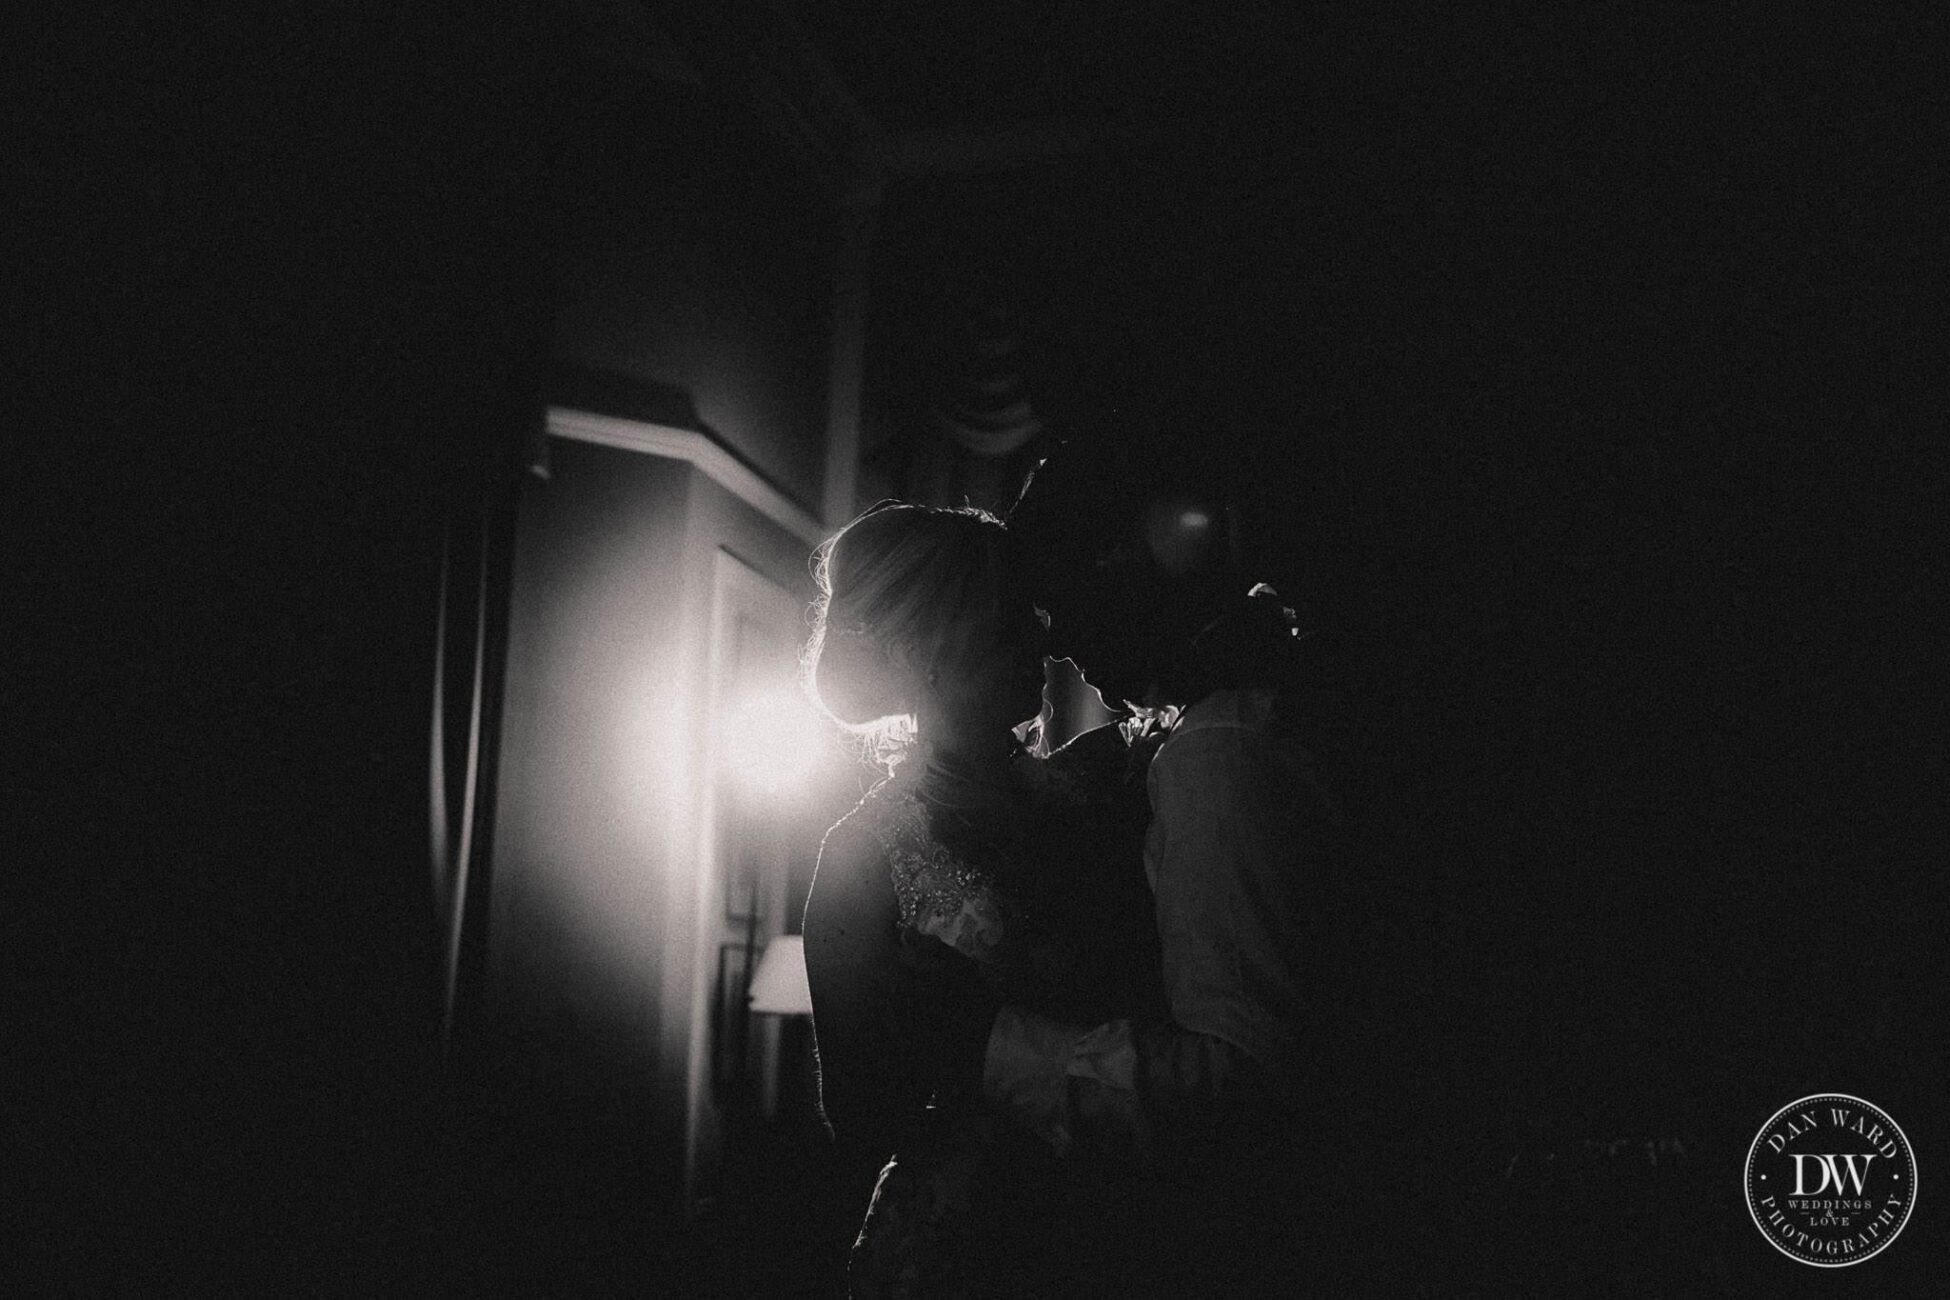 First Dance wedding photography at the Headland hotel